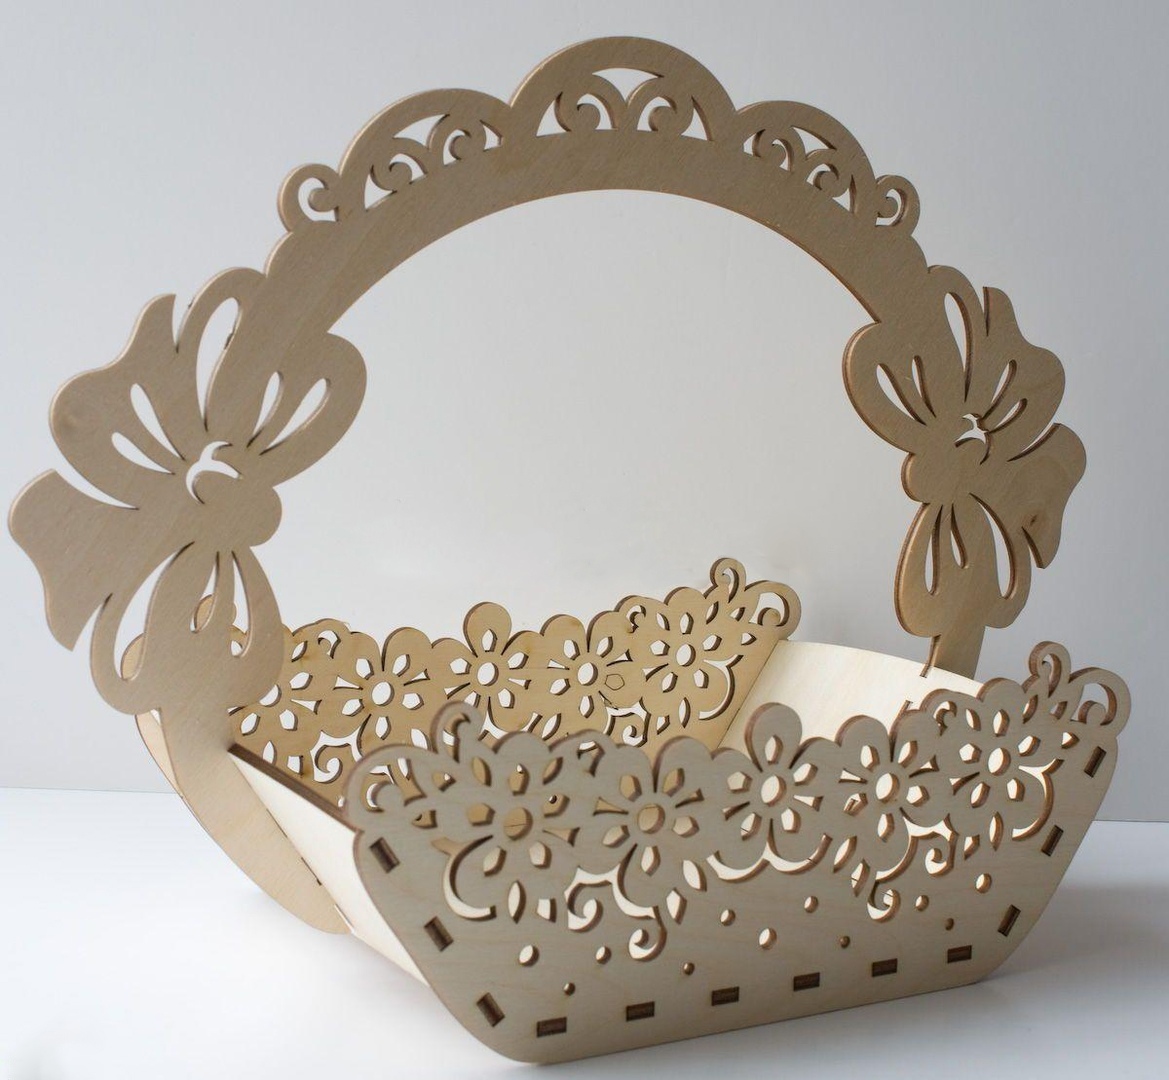 Laser Cut Wooden Decorative Basket With Handle Free Vector